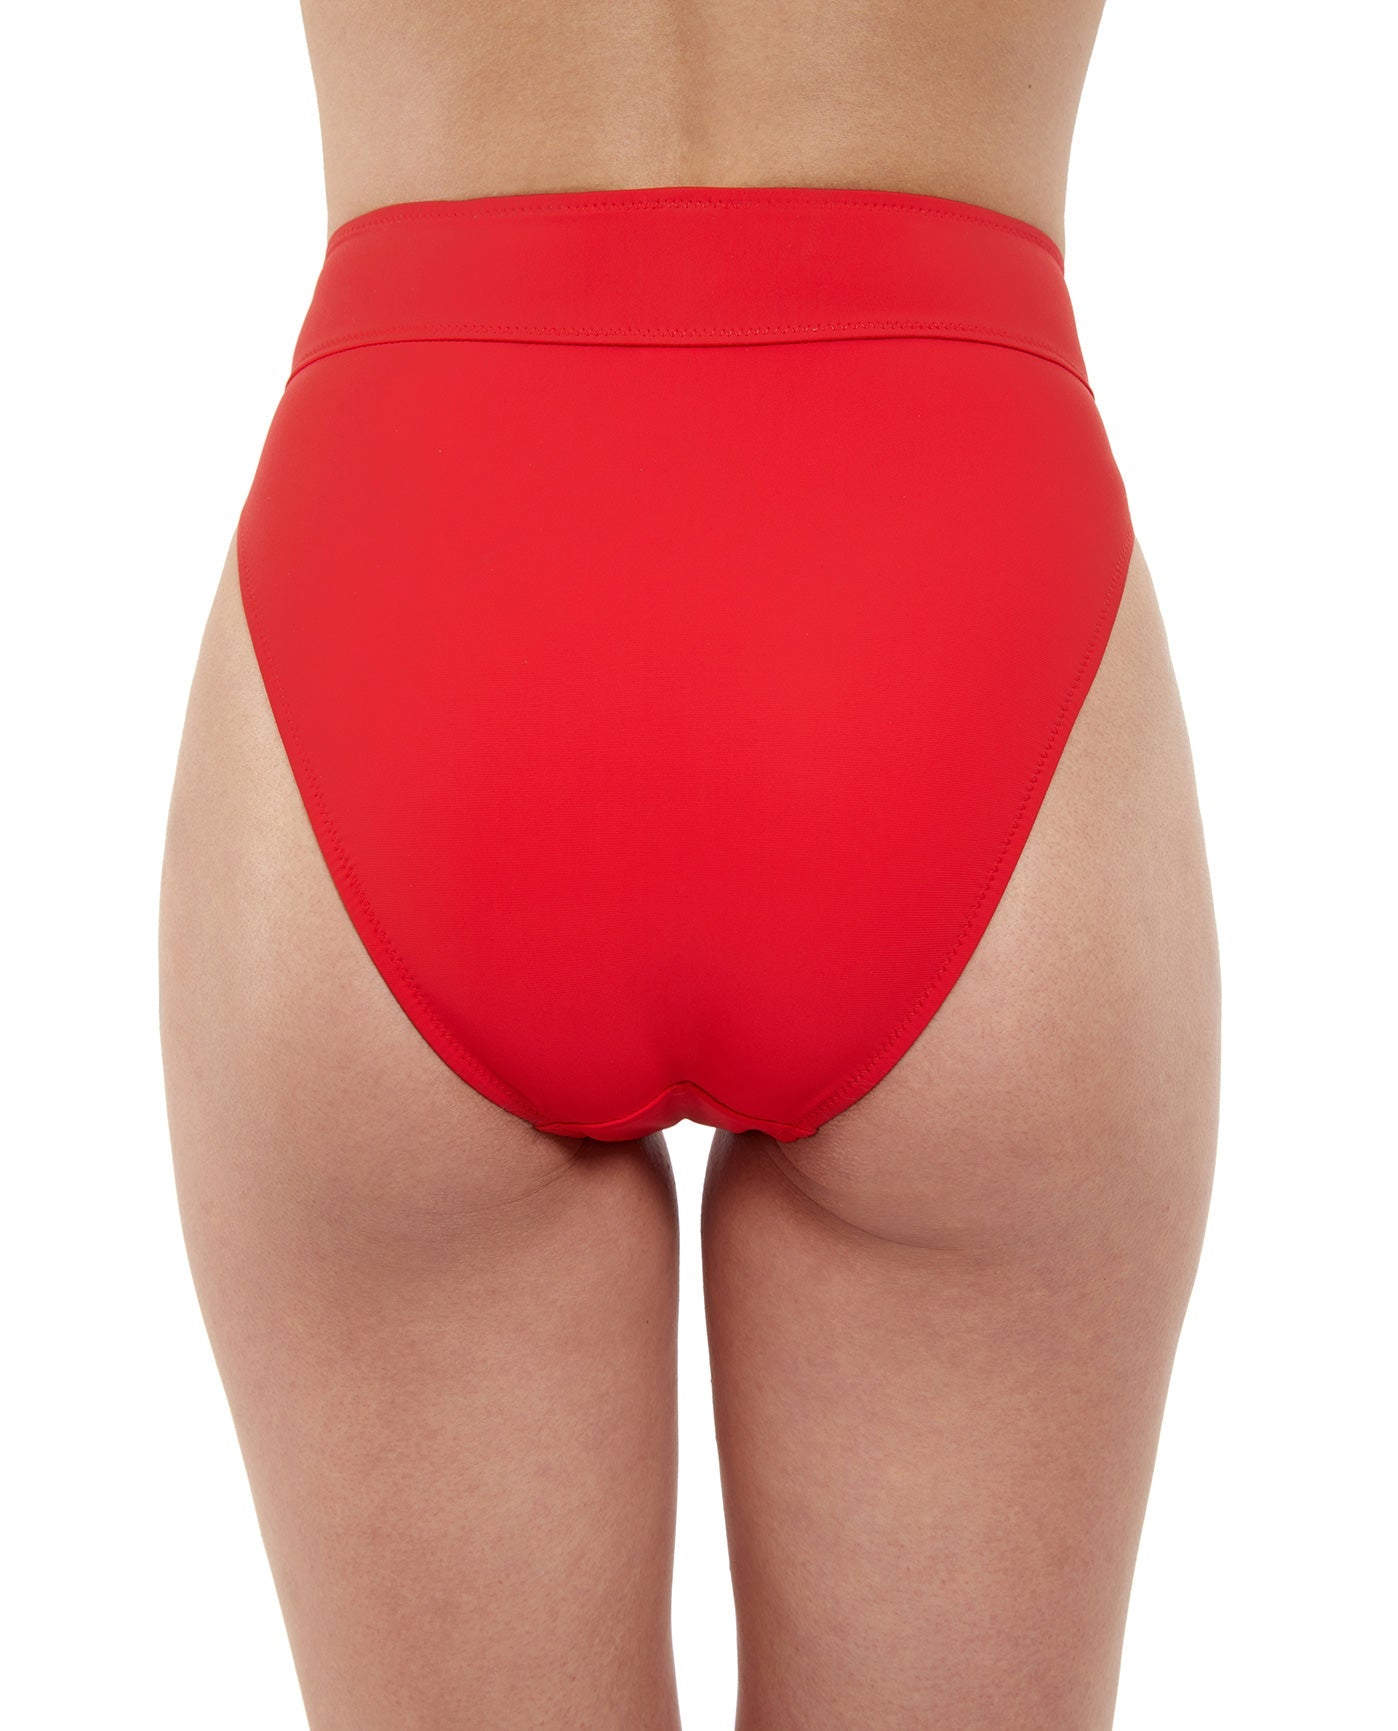 Back View Of Free Sport Ultimate Wave Full Coverage Bikini Bottom | FREE SPORT ULTIMATE WAVE RED